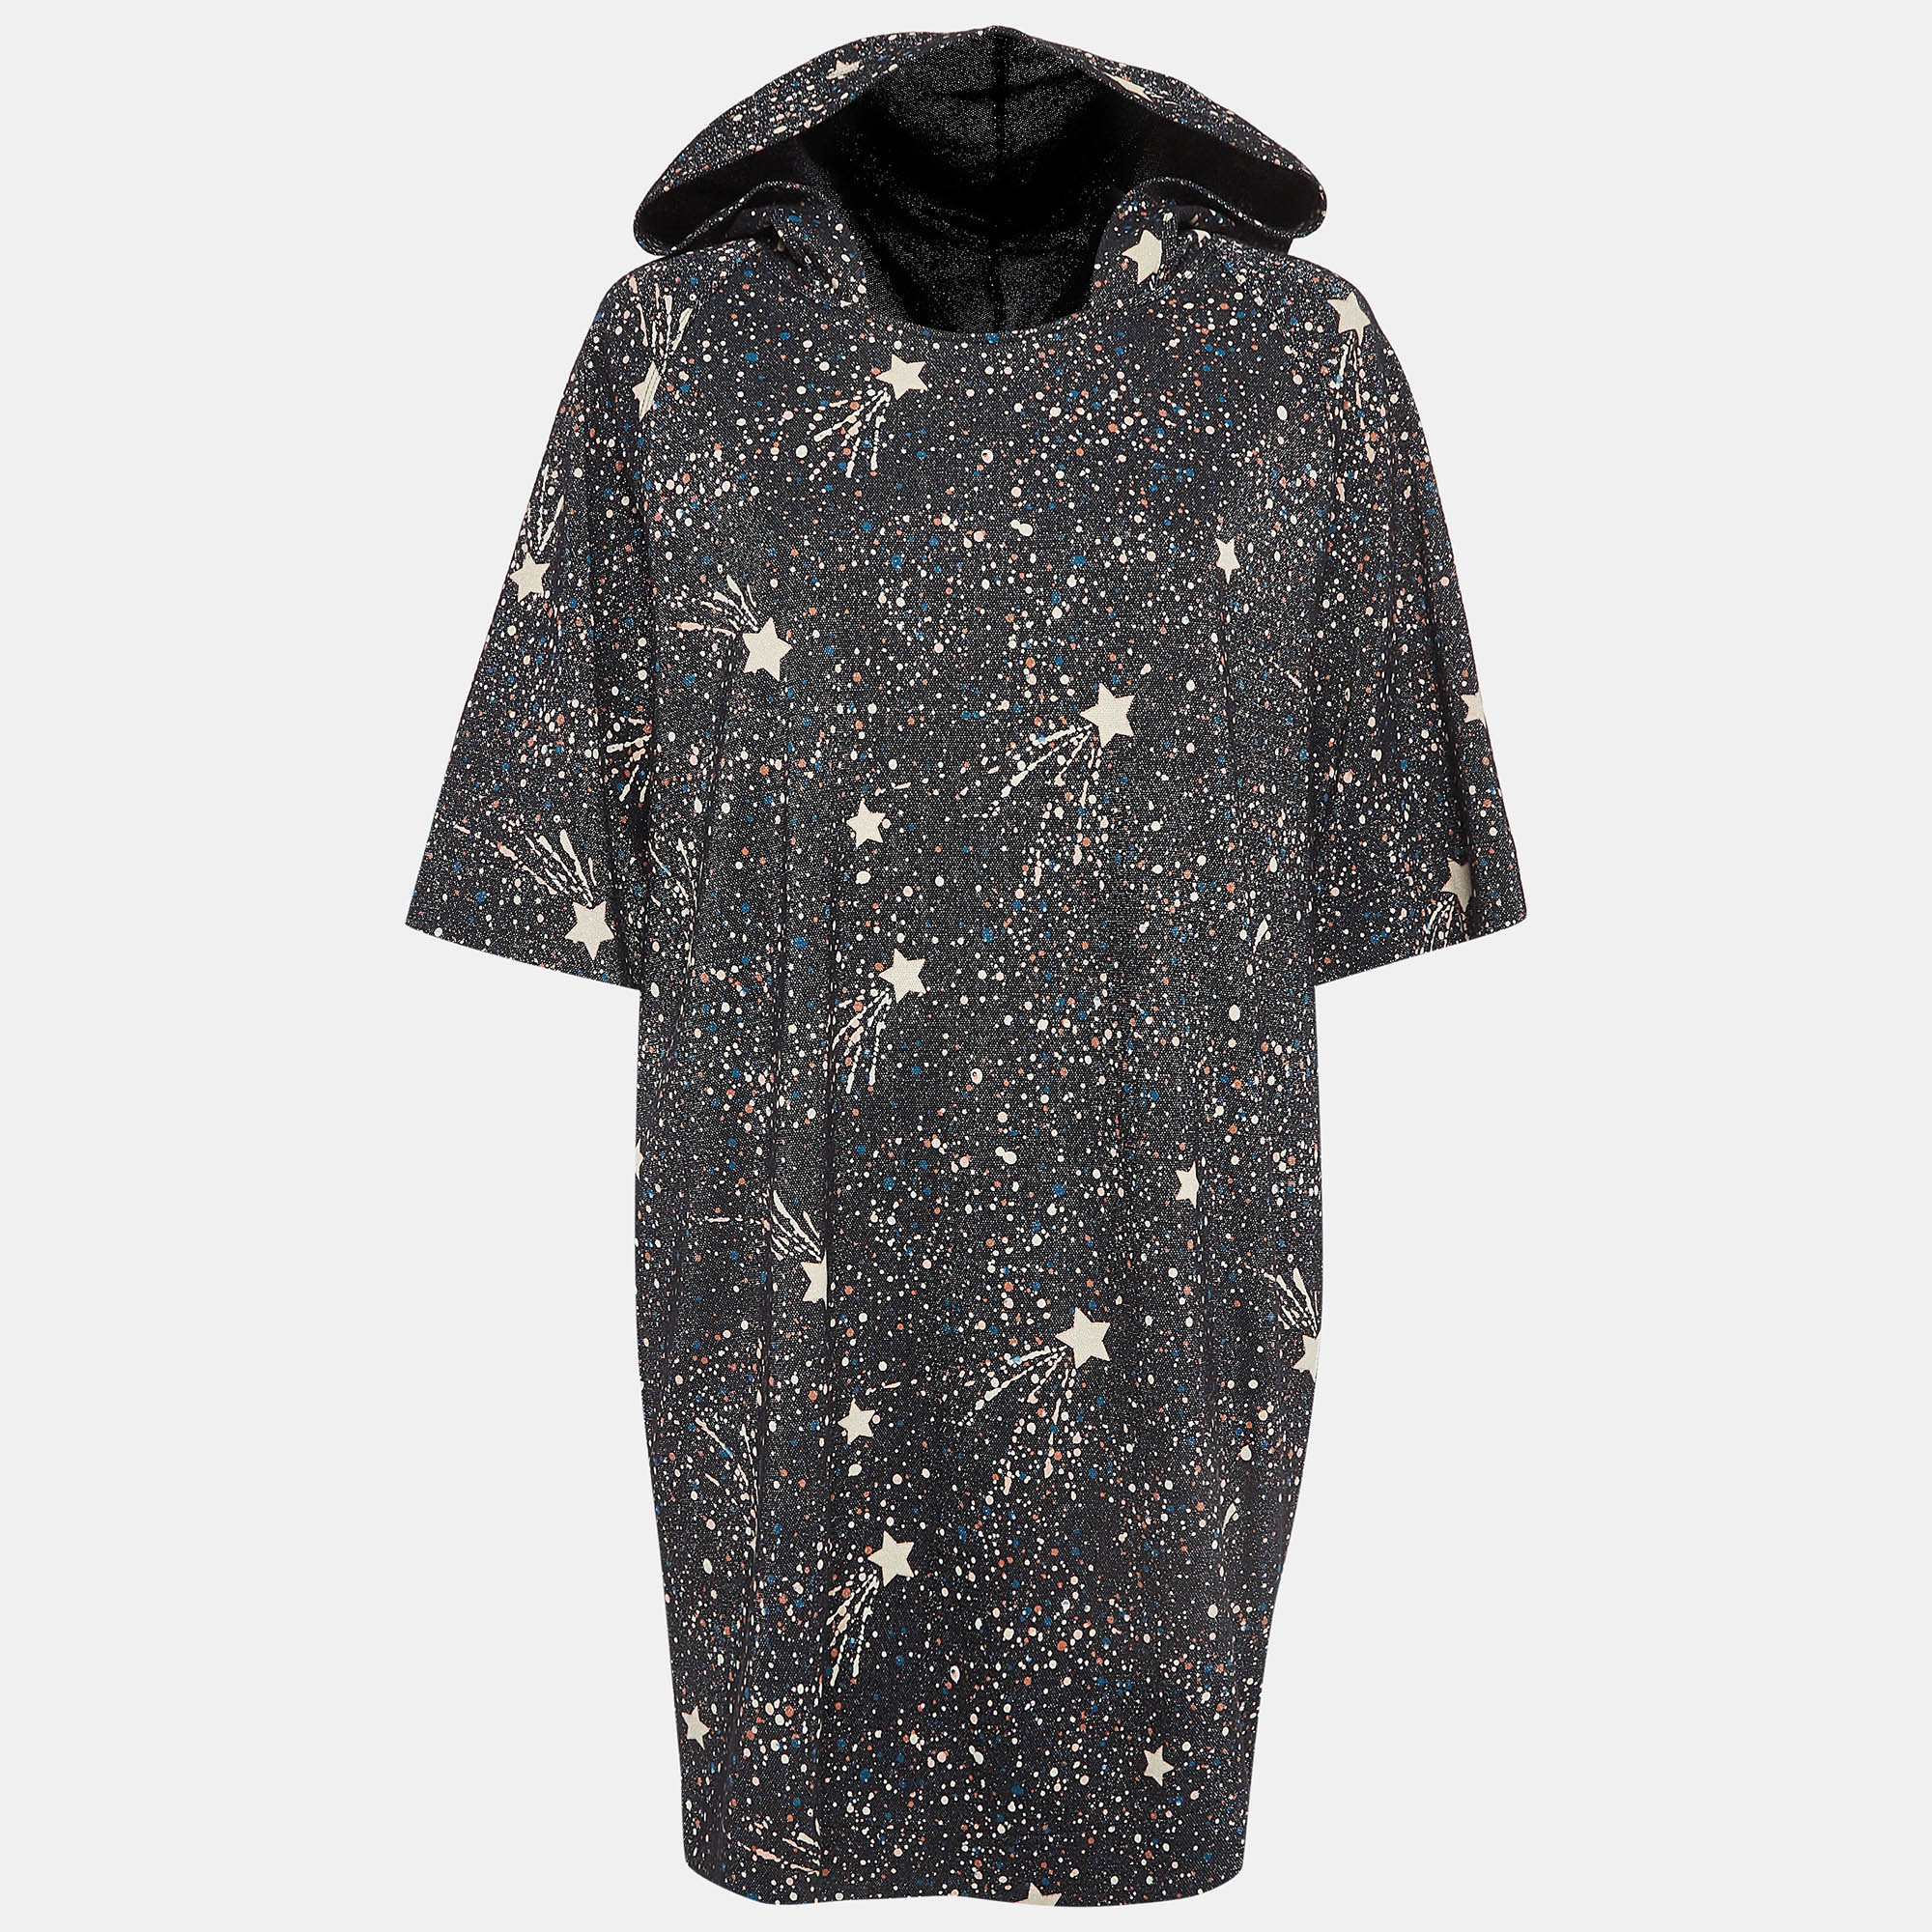 Pre-owned See By Chloé Black Stars Print Lurex Knit Hooded Short Dress M